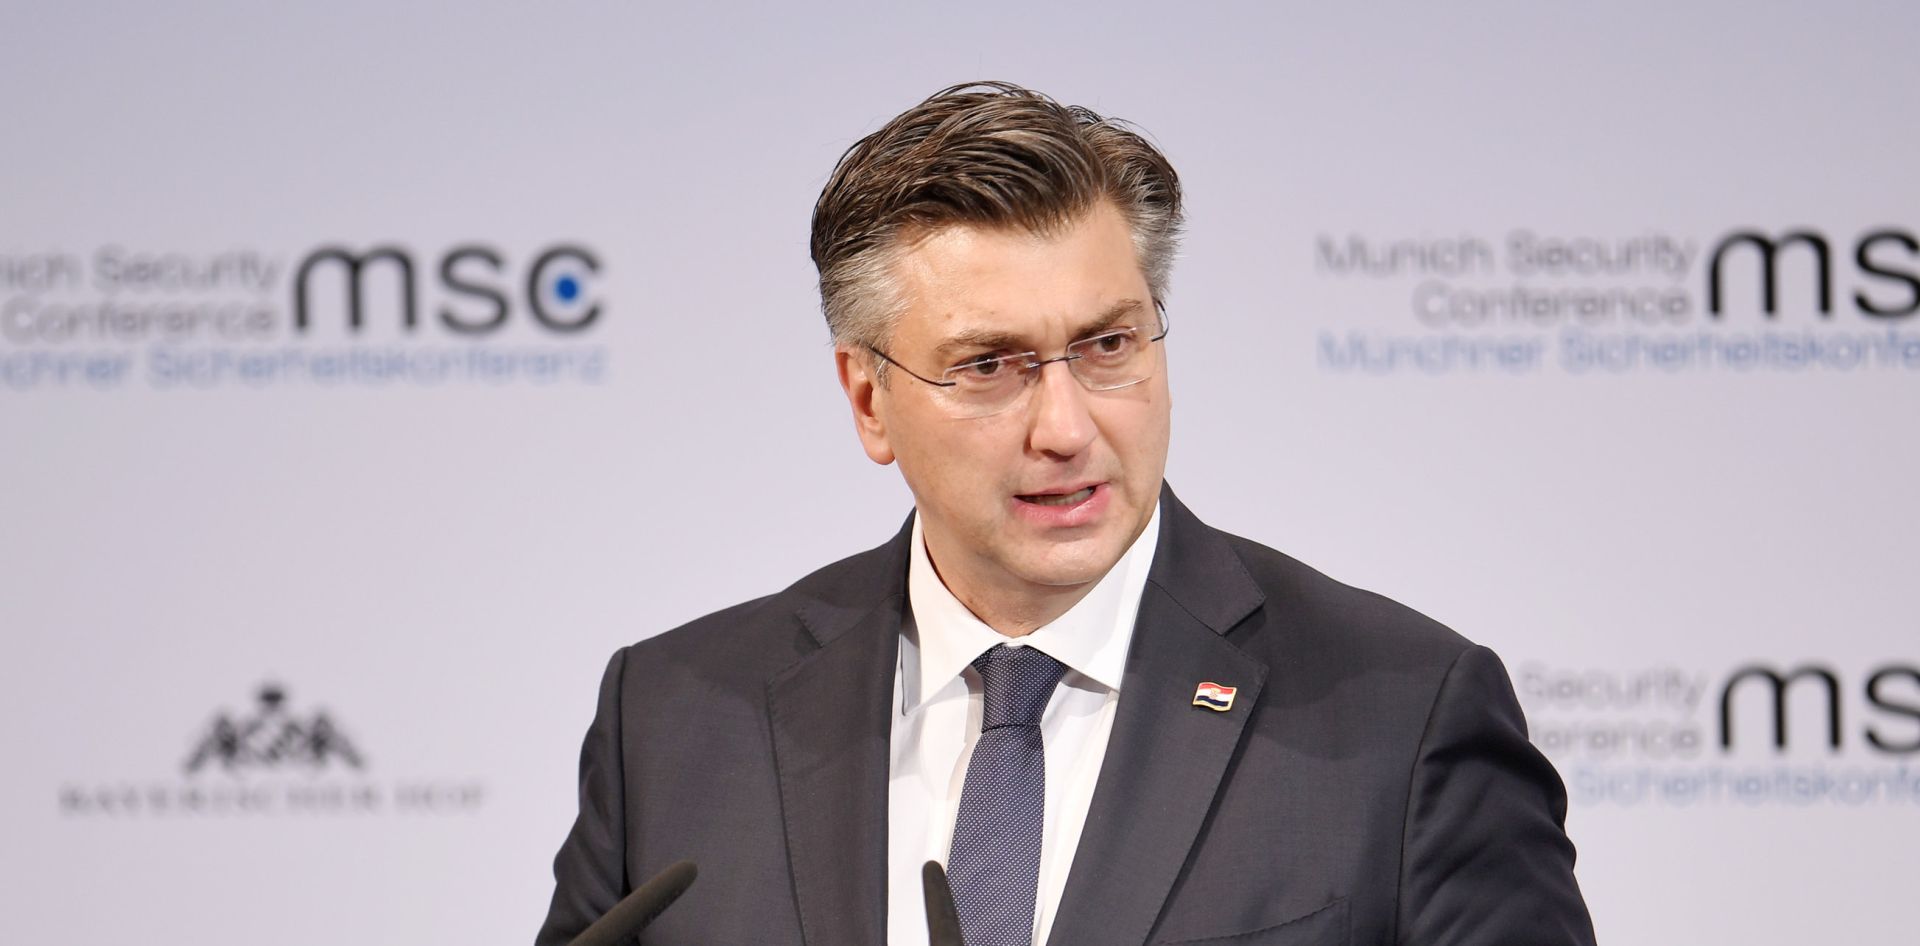 16 February 2020, Bavaria, Munich: Croatian Prime Minister Andrej Plenkovic speaks during the last day of the 56th Munich Security Conference. Photo: Tobias Hase/dpa